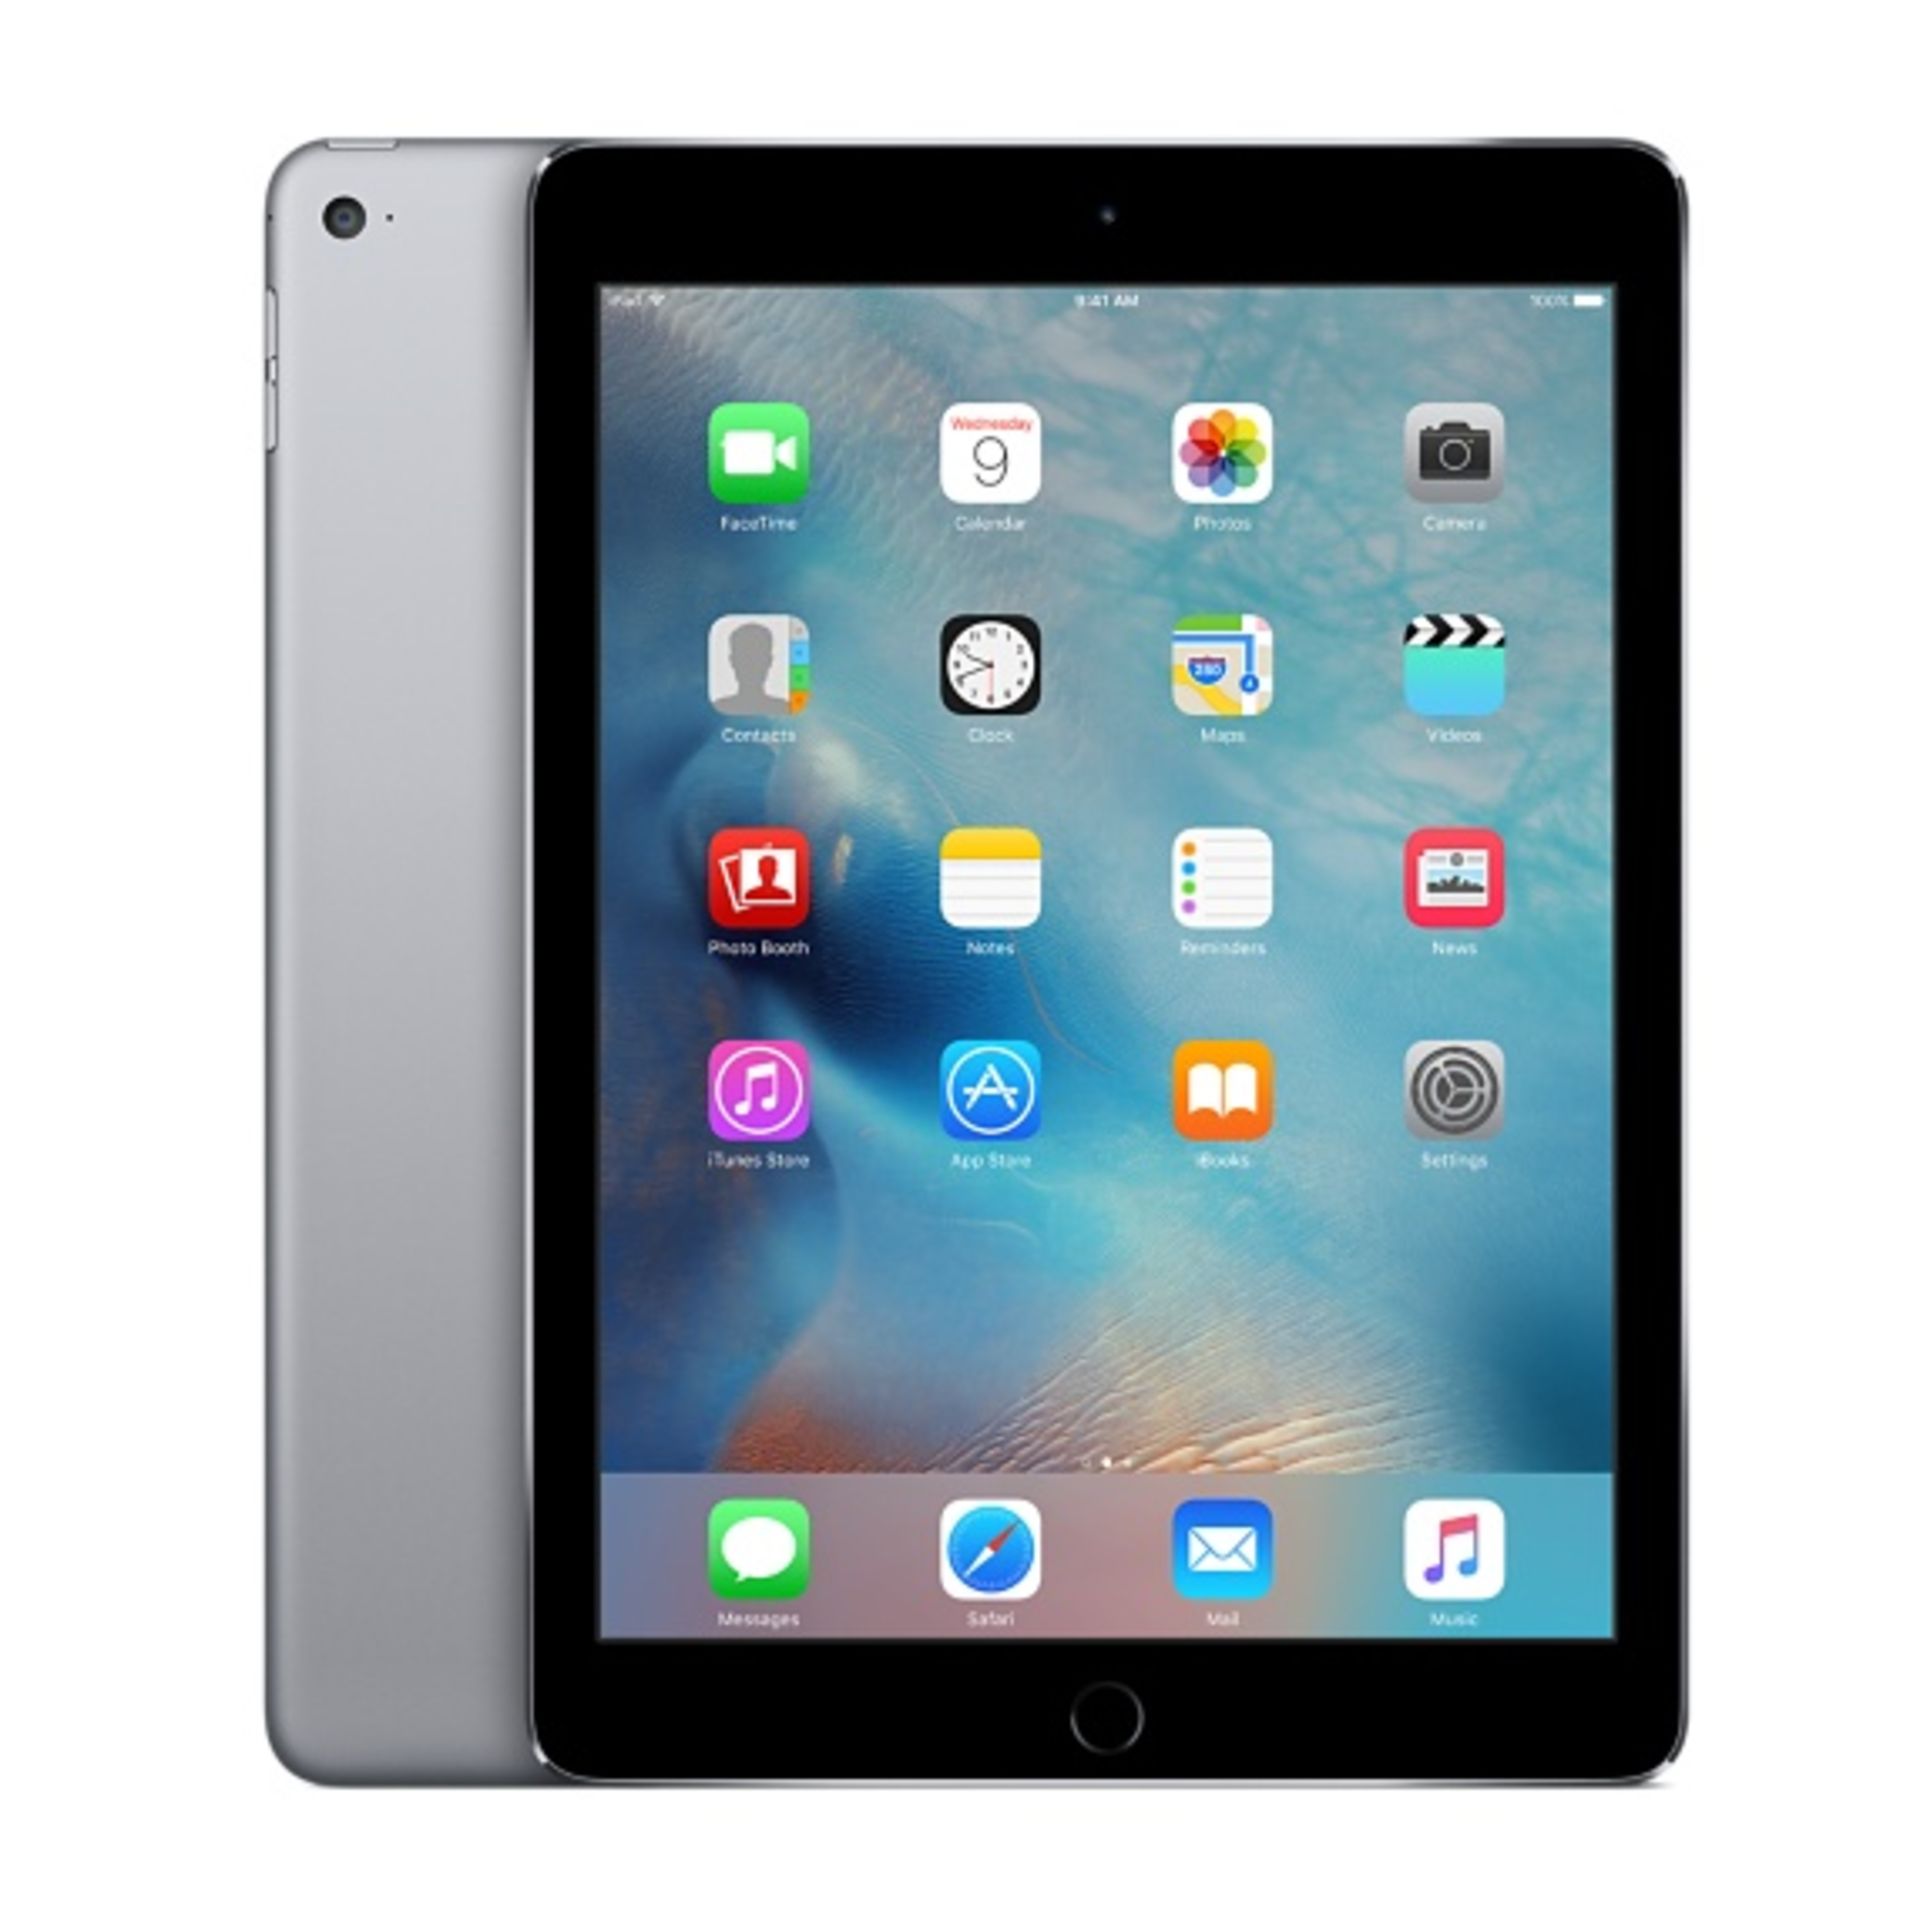 V Grade A Apple iPad Air 2 16GB Space Grey - Wi-Fi - In Generic Box - With Apple Accessories X 2